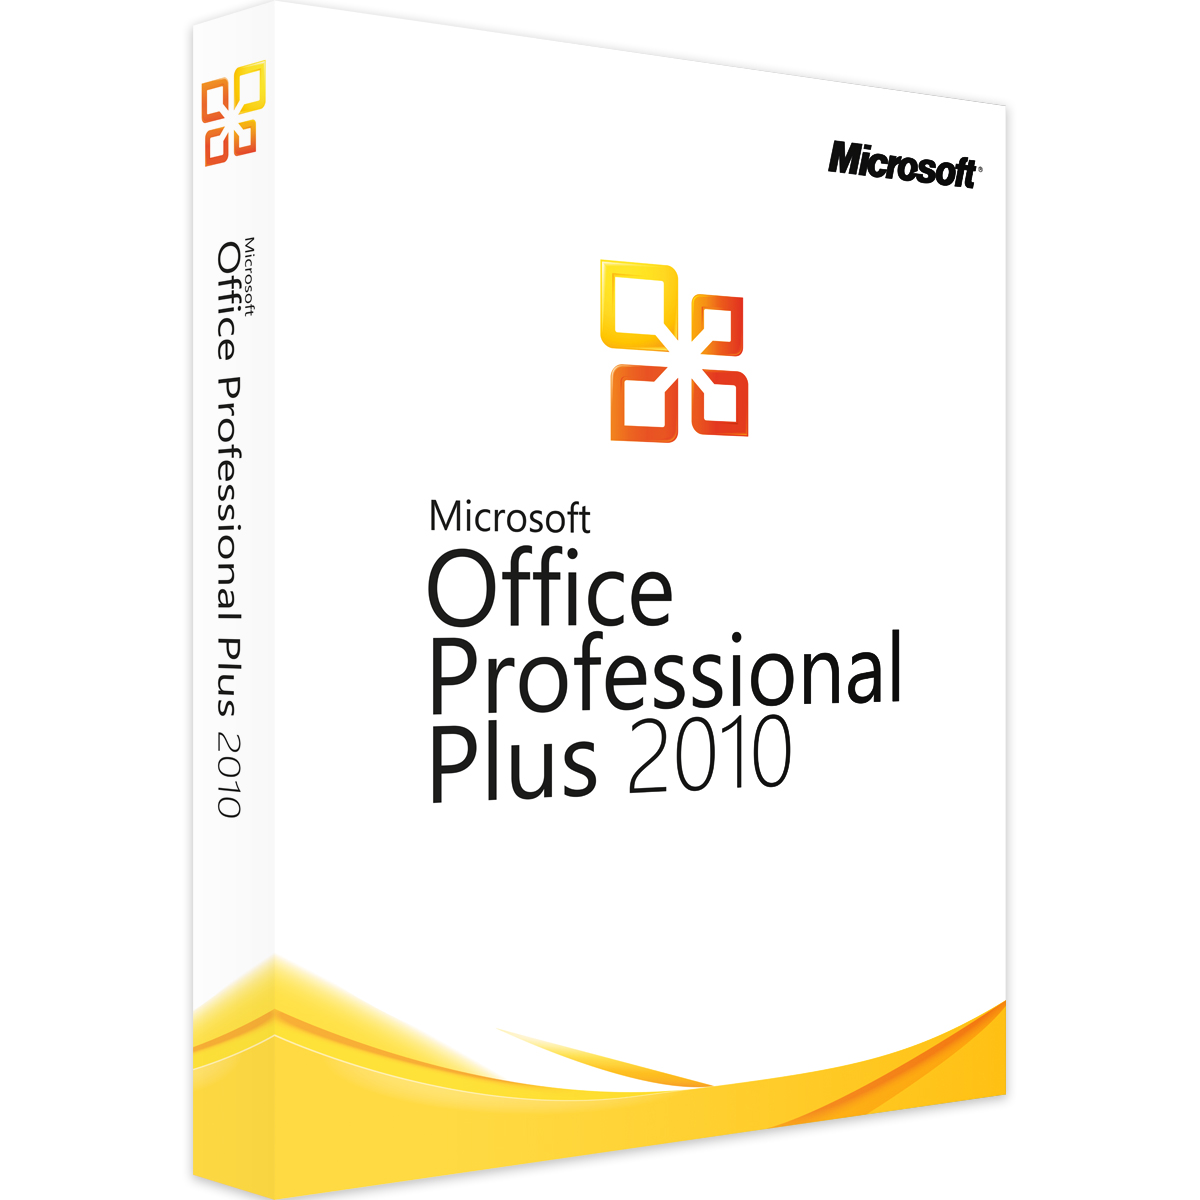 microsoft office professional plus 2010 download free